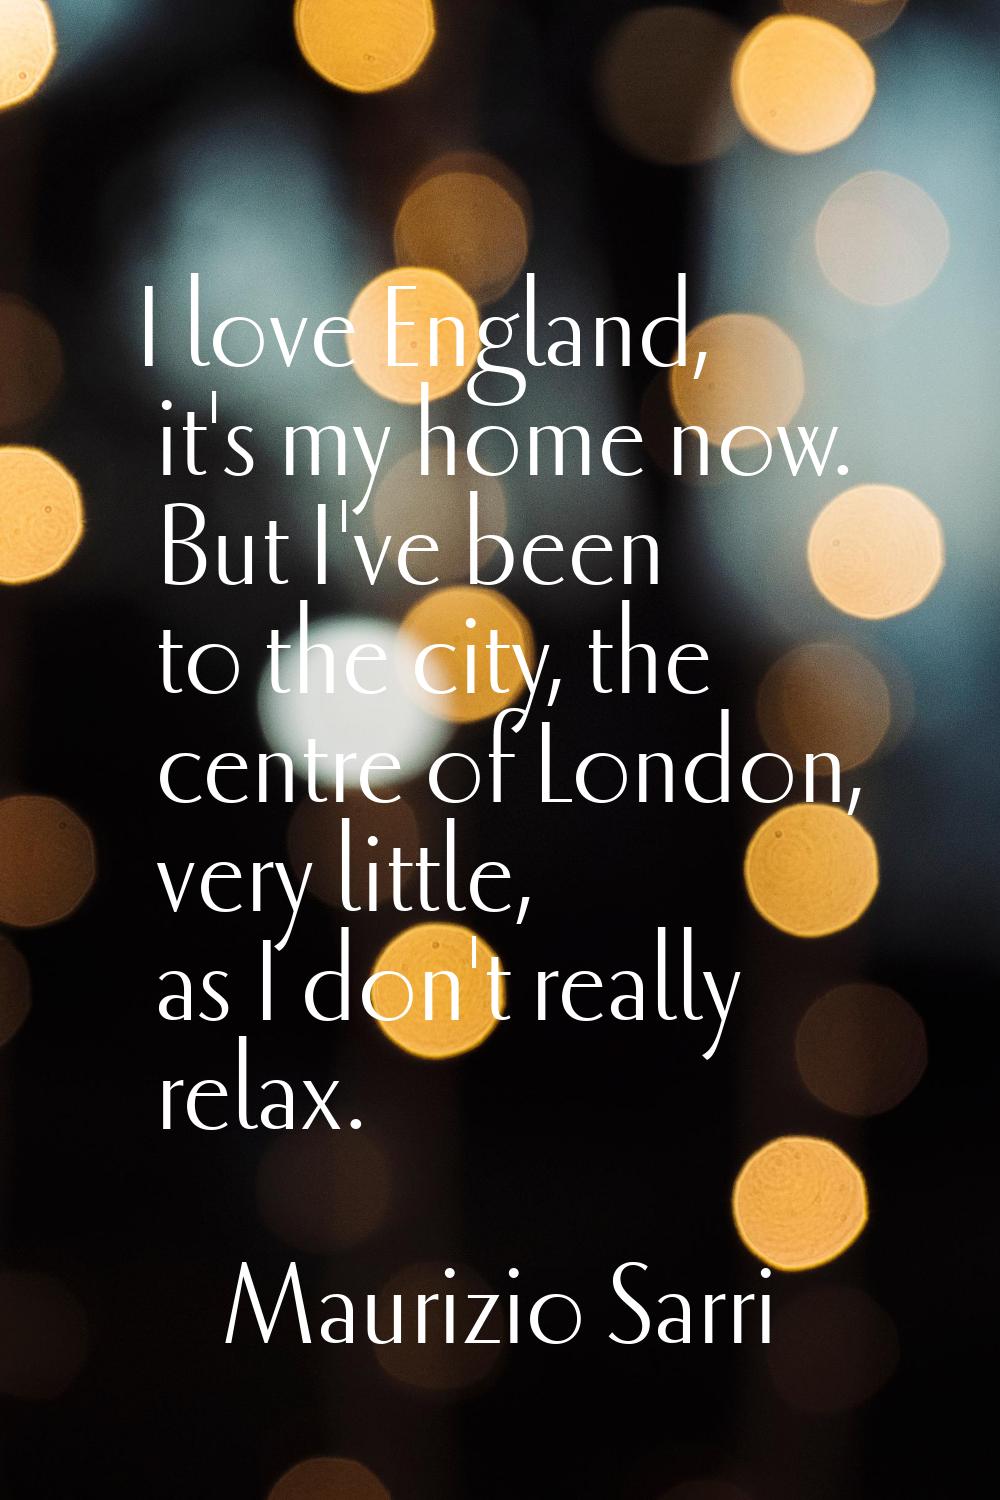 I love England, it's my home now. But I've been to the city, the centre of London, very little, as 